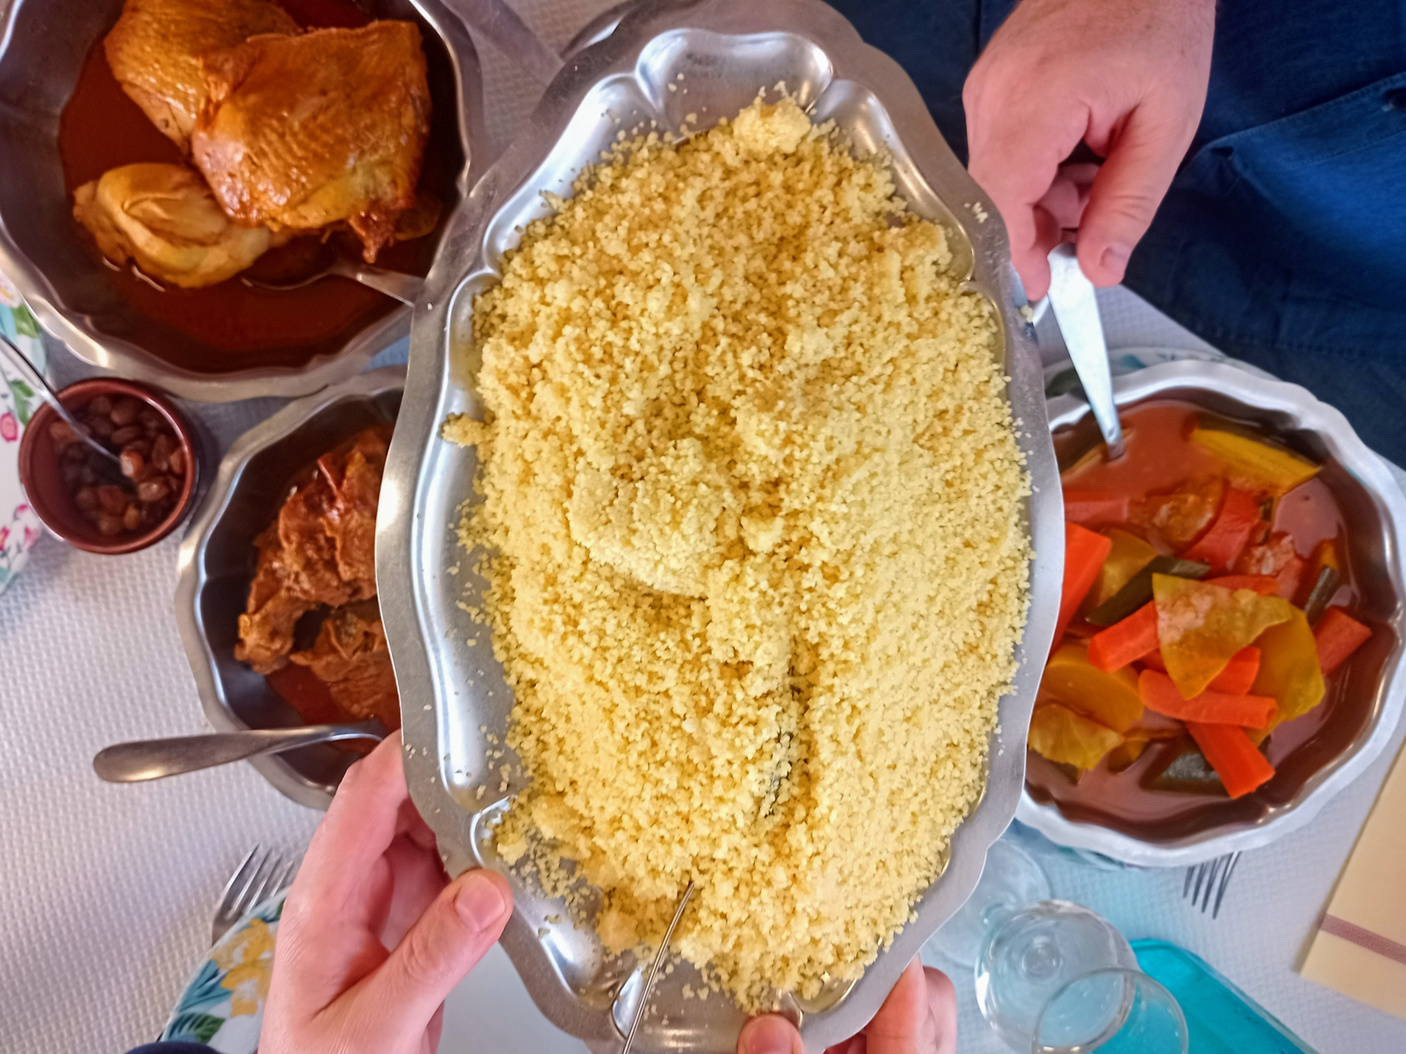 Photograph of royal couscous with meat and semolina vegetables